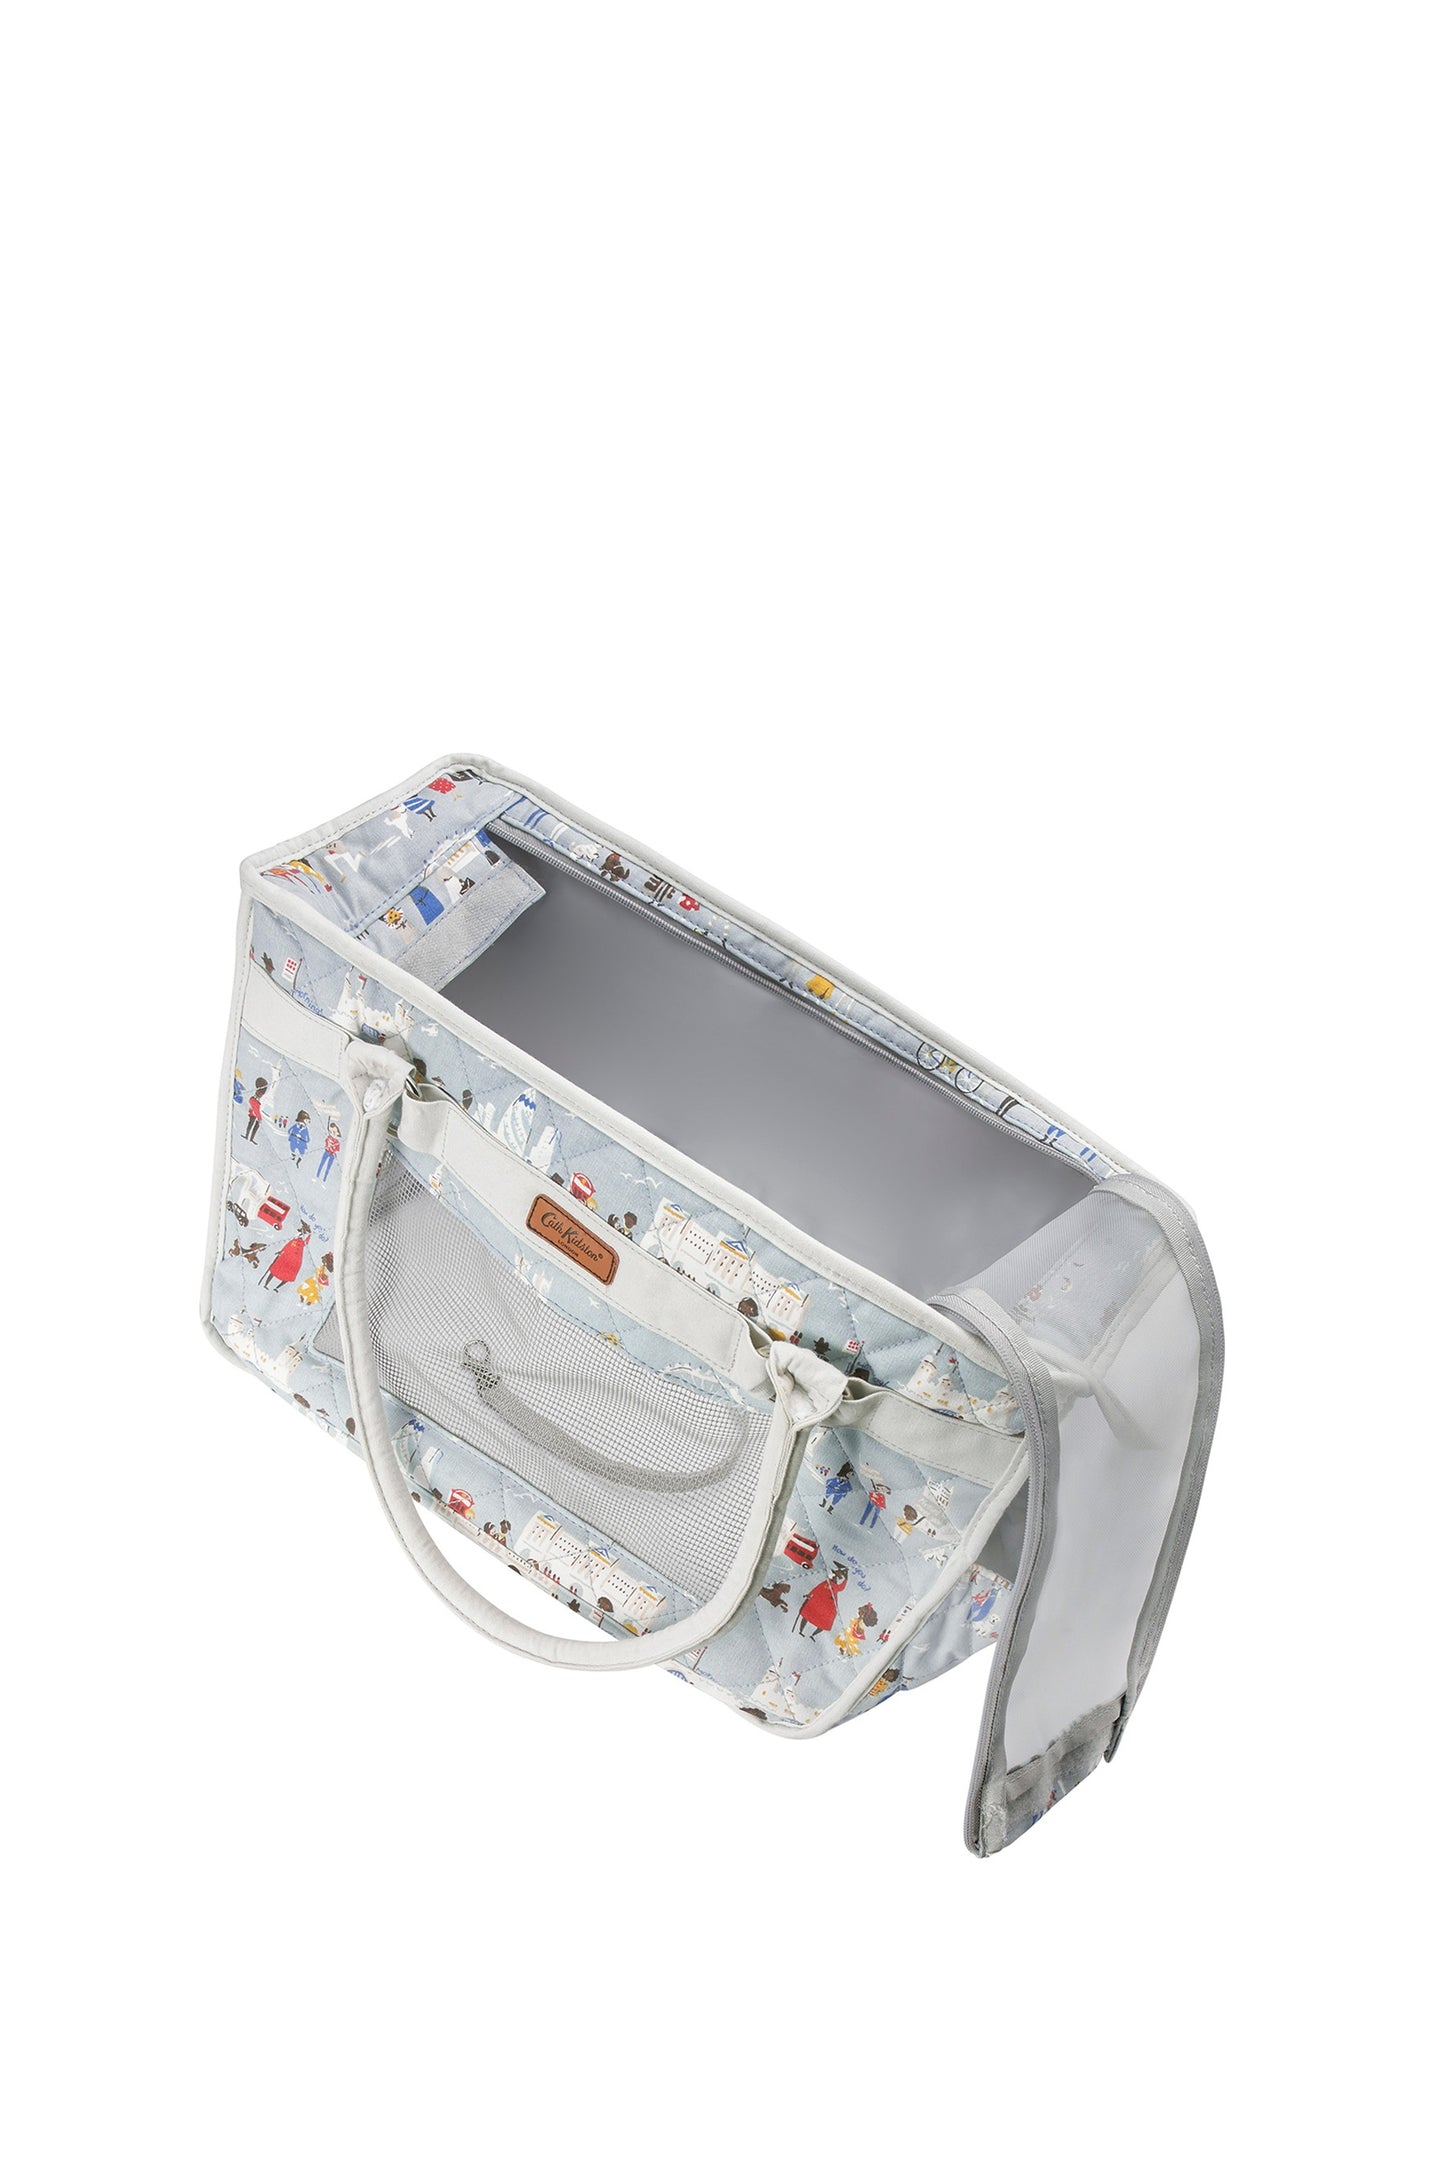 Next - Pet Carrier by Cath Kidston